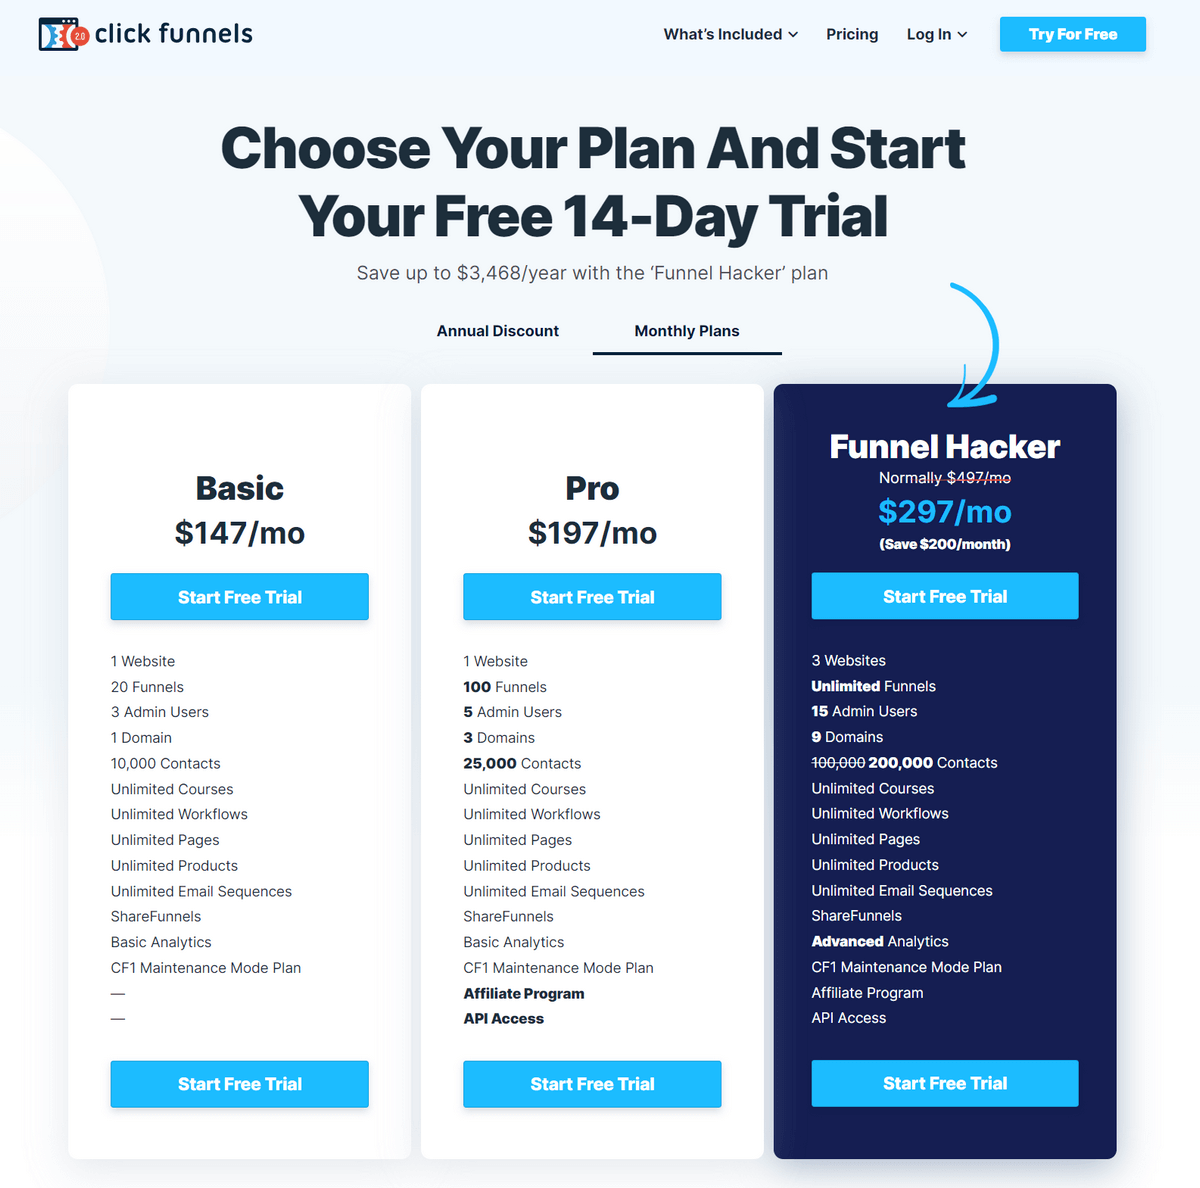 ClickFunnels offers 3 plans at quite high rates